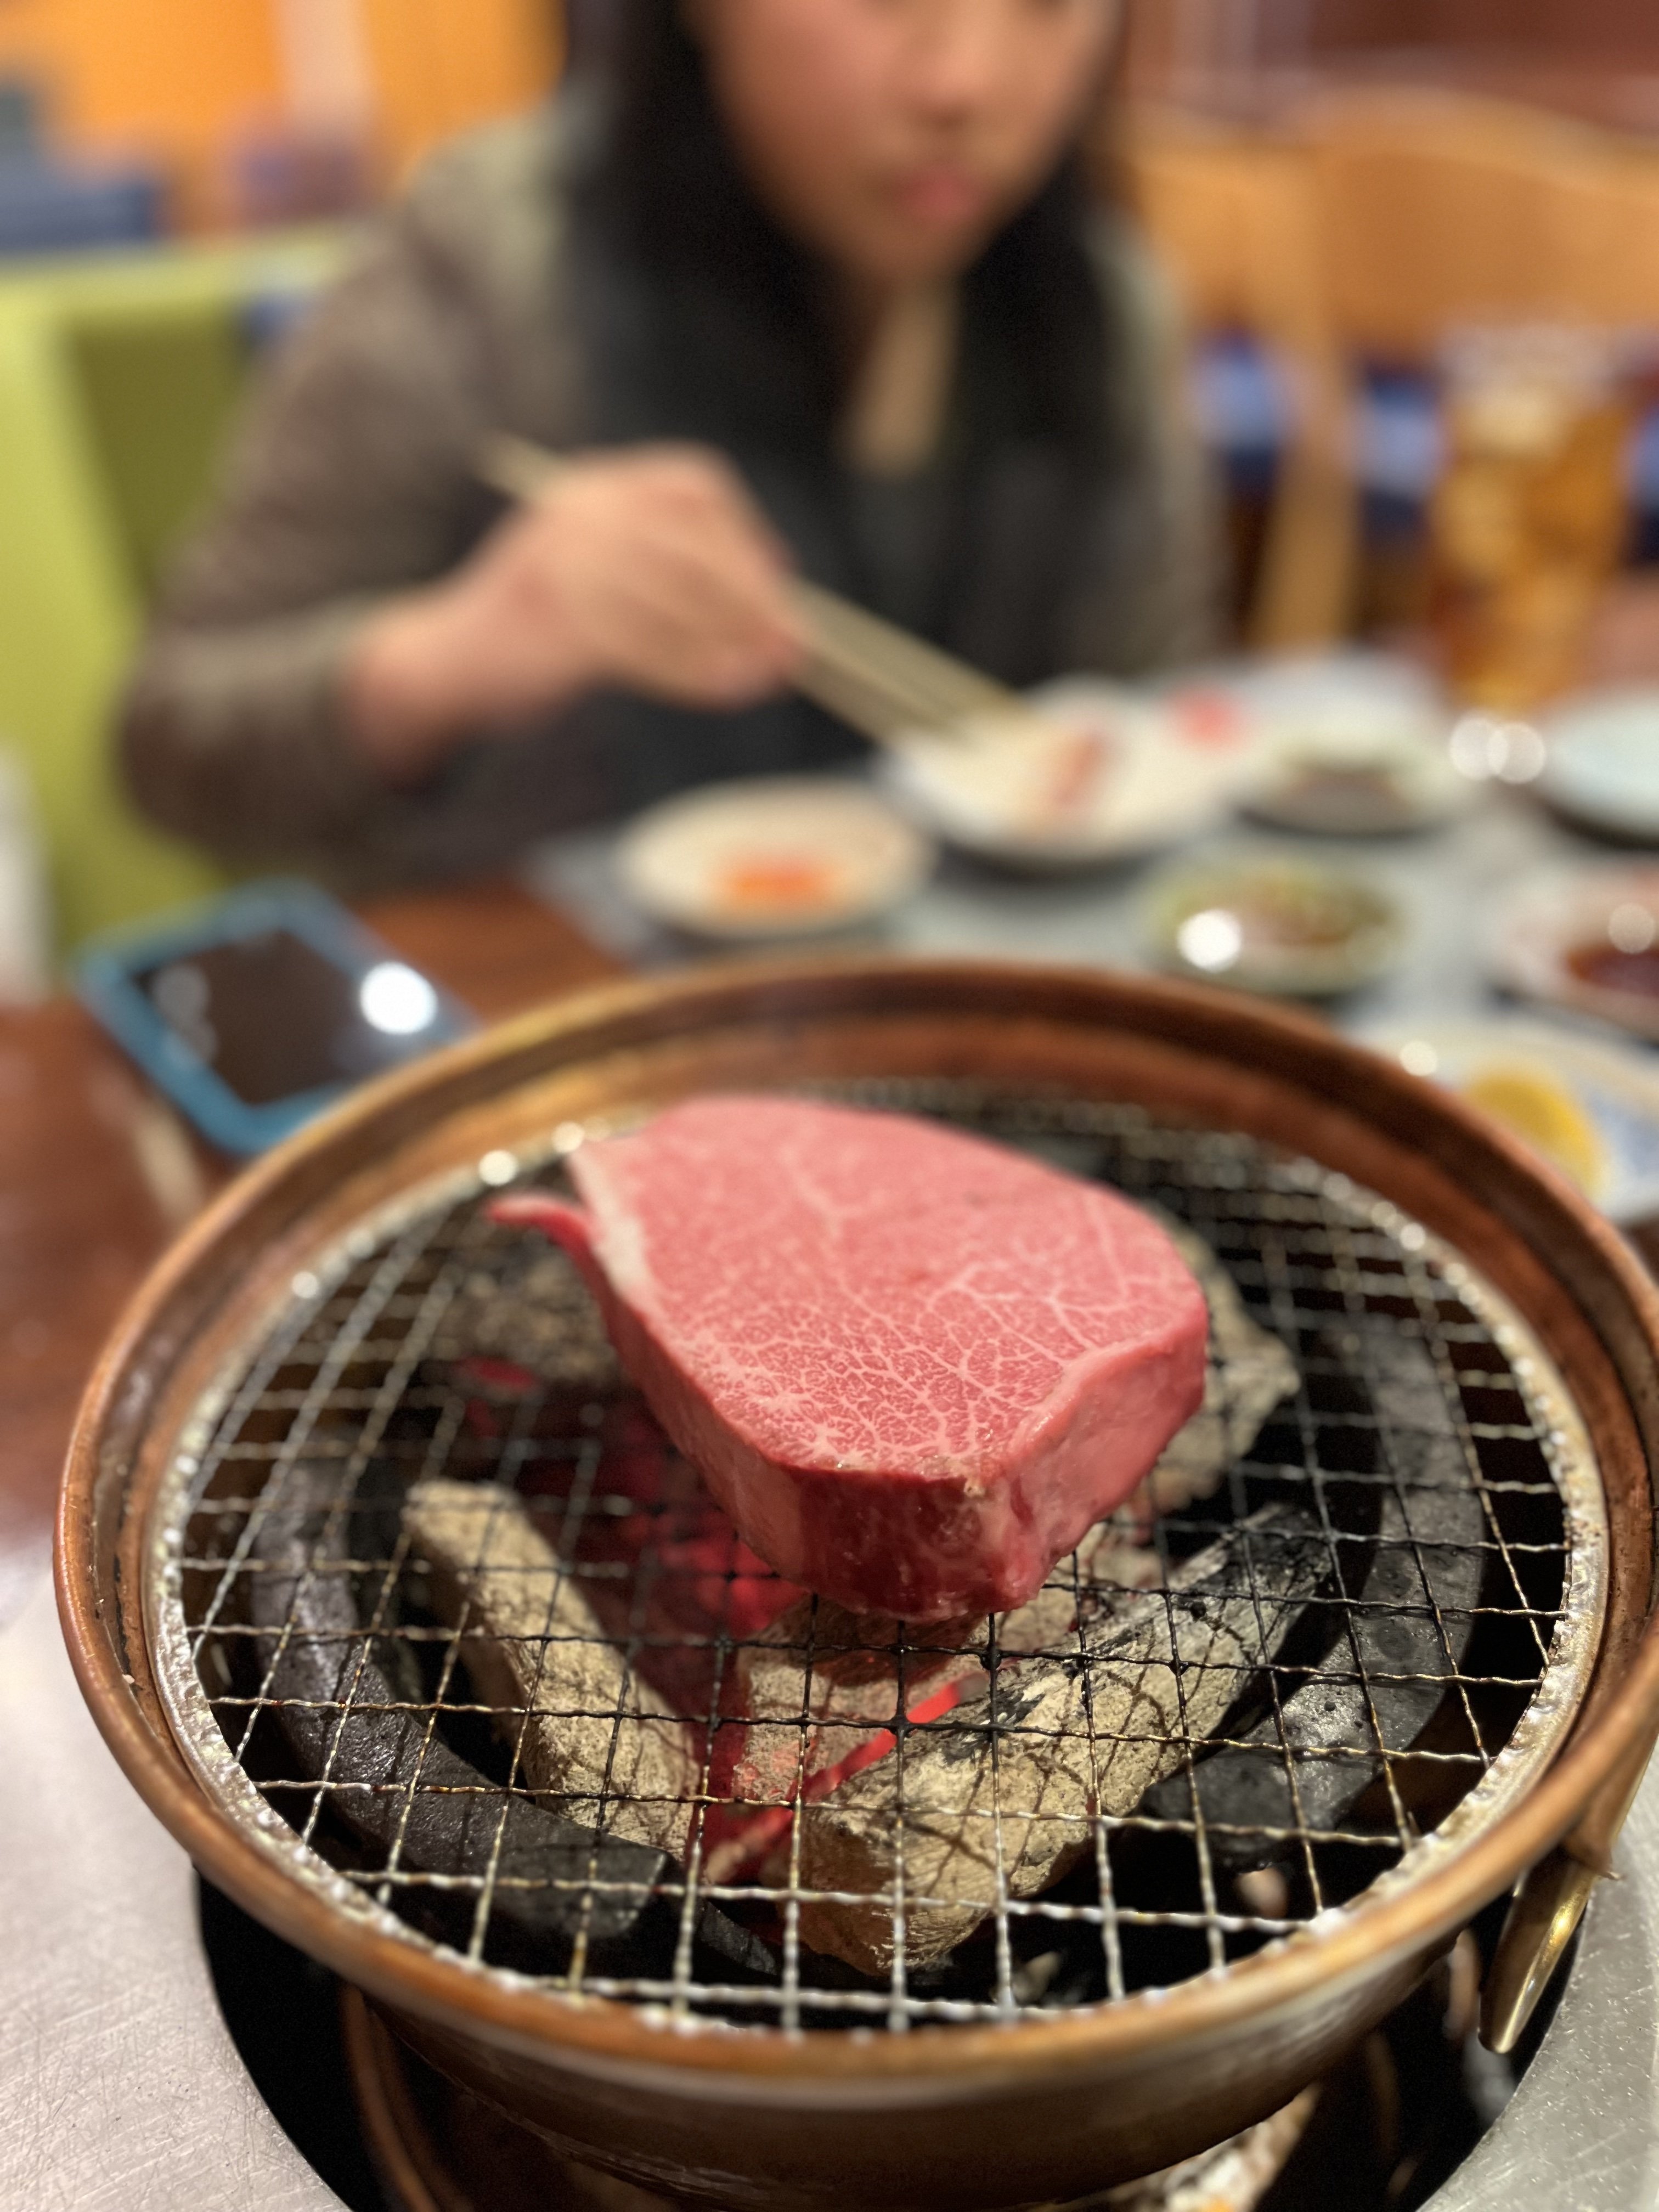 Japanese wagyu beef at Serita, a “hidden gem” in Tokyo that has been posted about on social media. While some restaurants embrace internet fame, others try their best to avoid it. Photo: Charmaine Mok